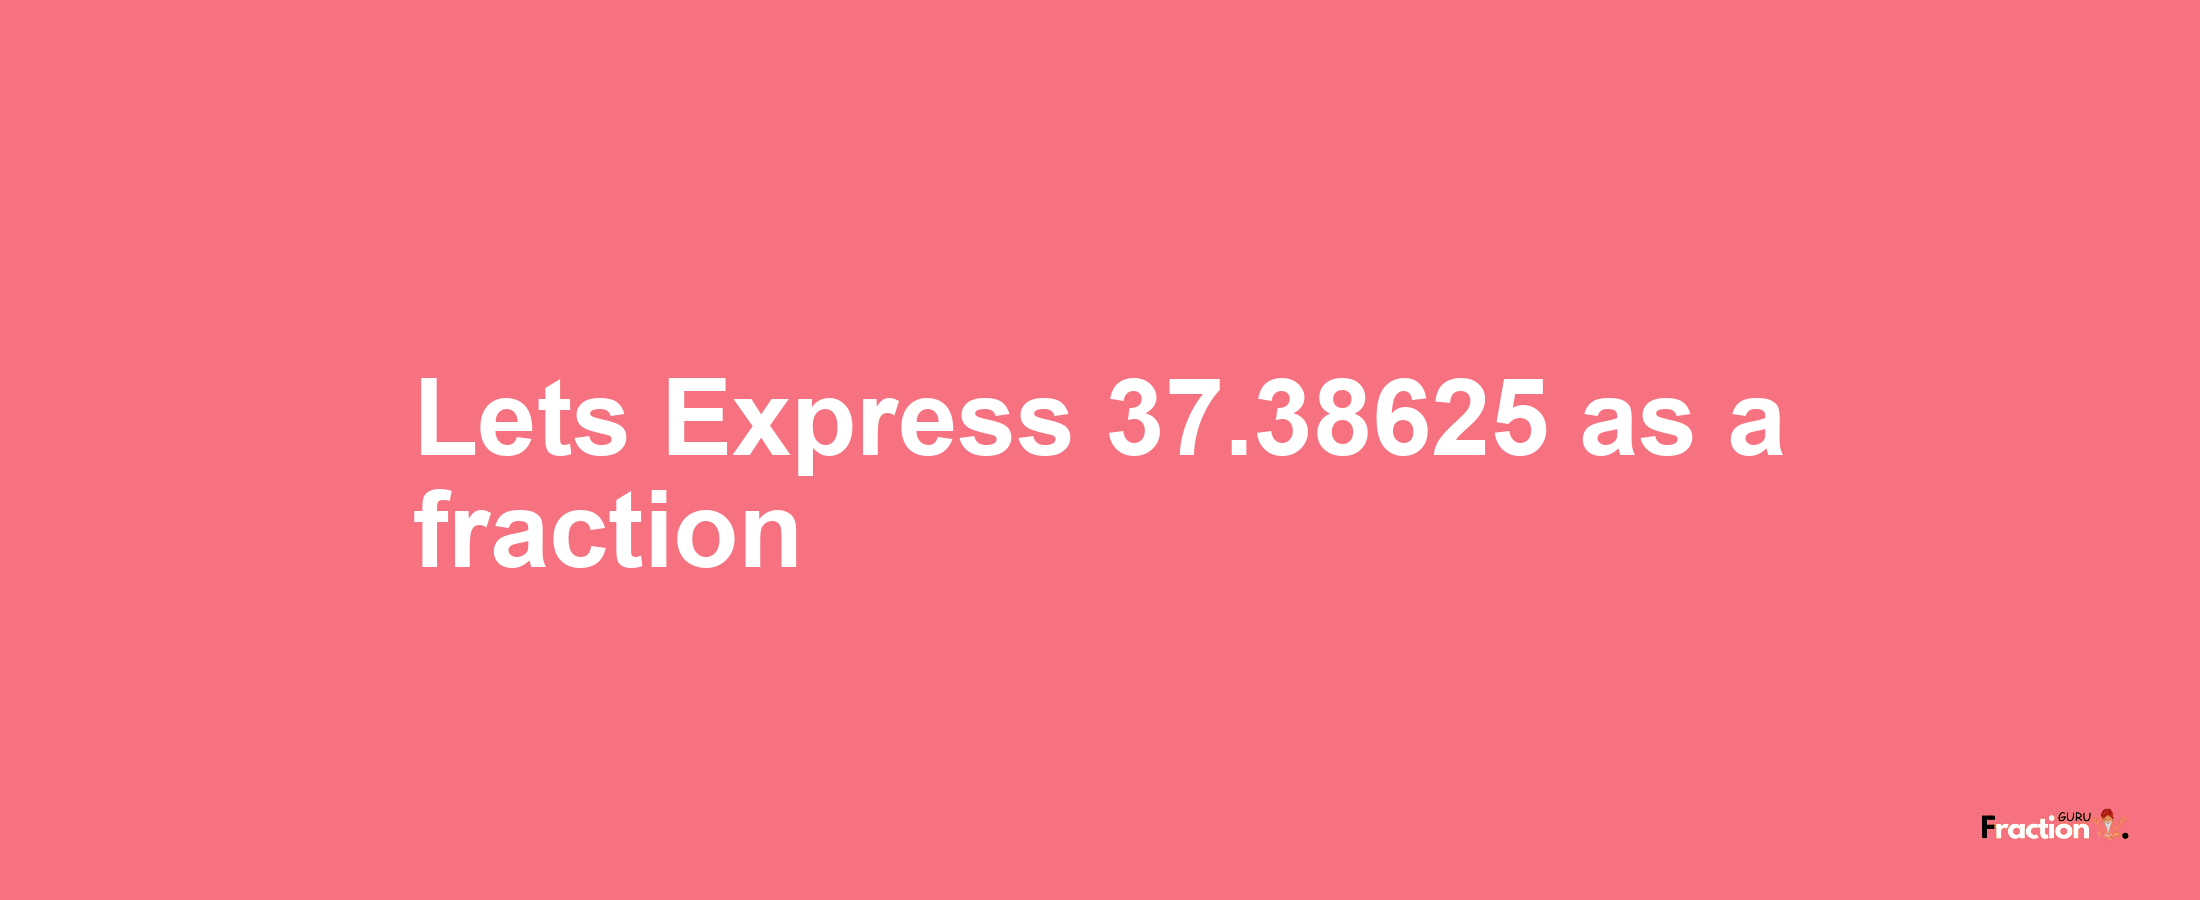 Lets Express 37.38625 as afraction